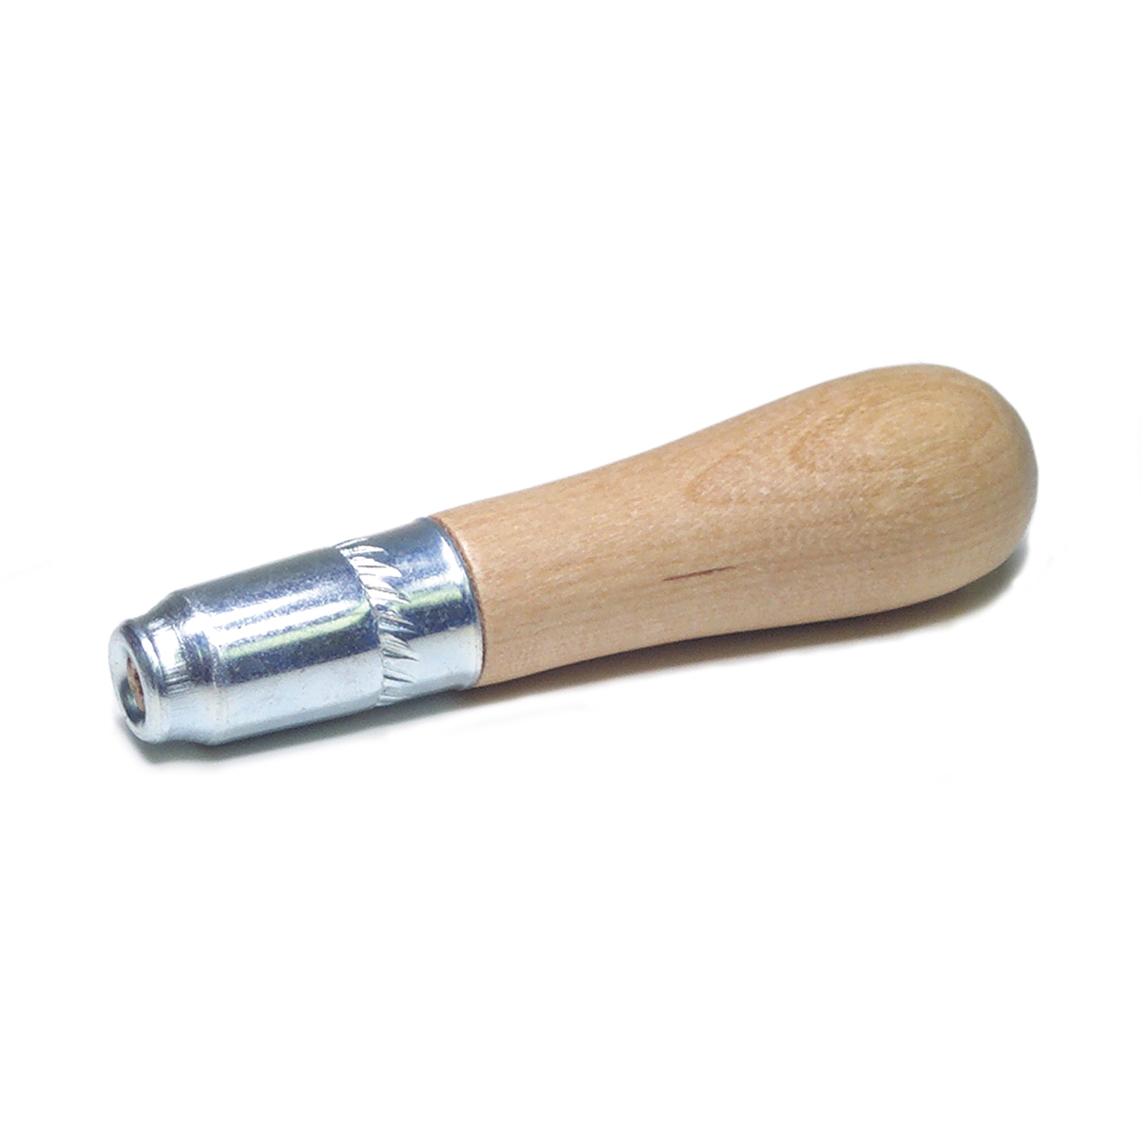 Lutz Wood File Handle, for Files 3"-6", Item No. 37.801